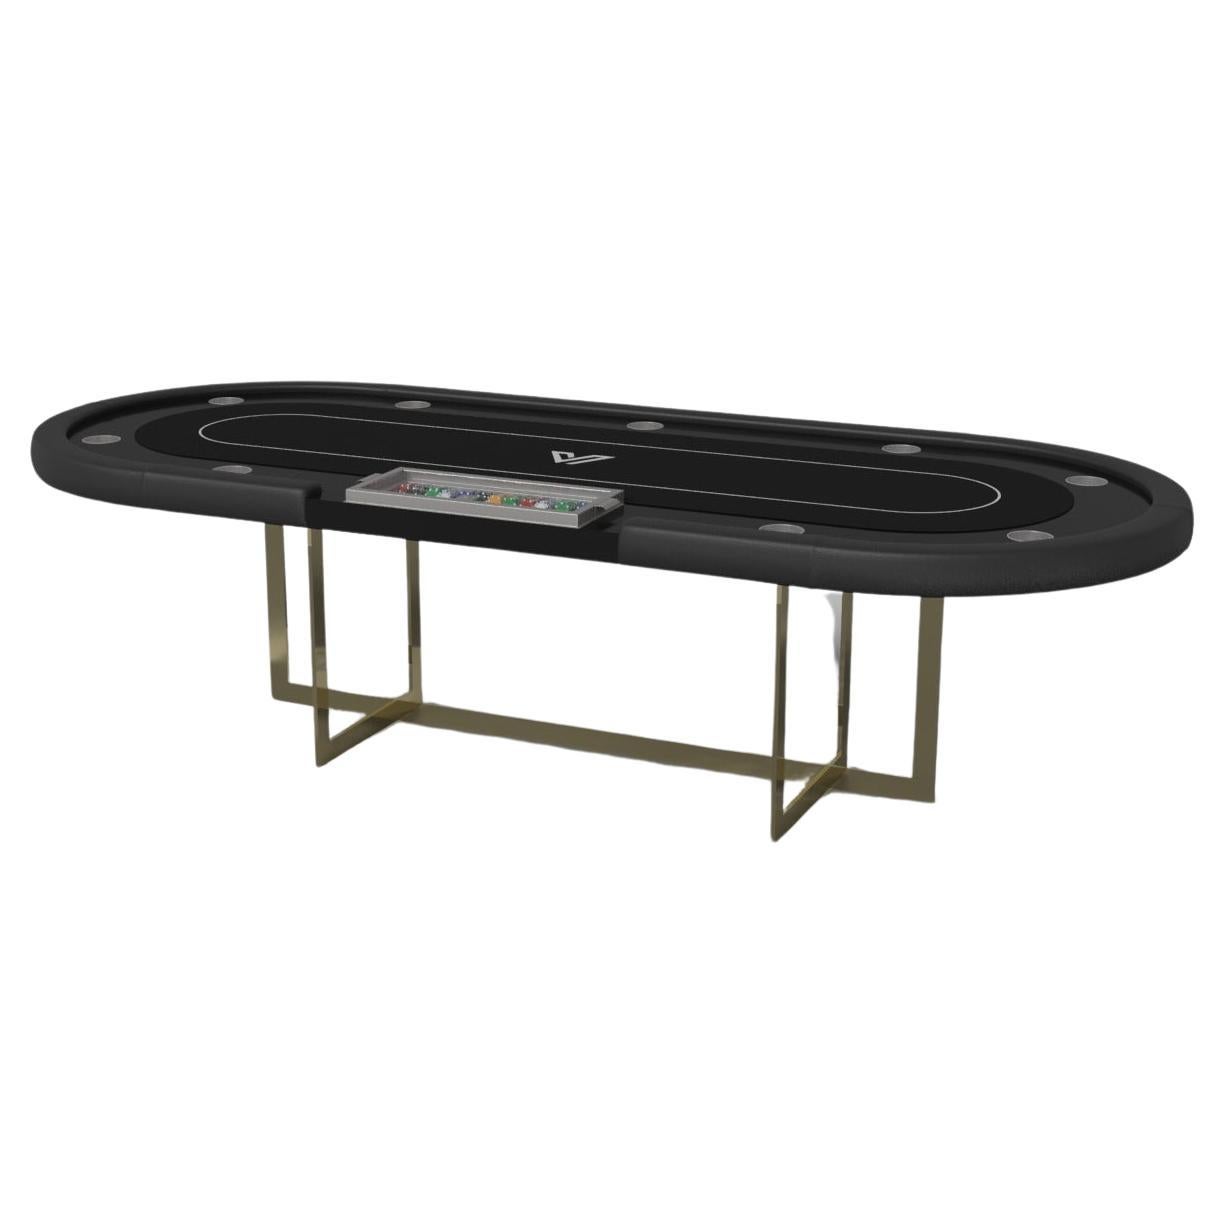 Elevate Customs Beso Poker Tables/Brass Stainless Steel Sheet Metal in 8'8" -USA For Sale